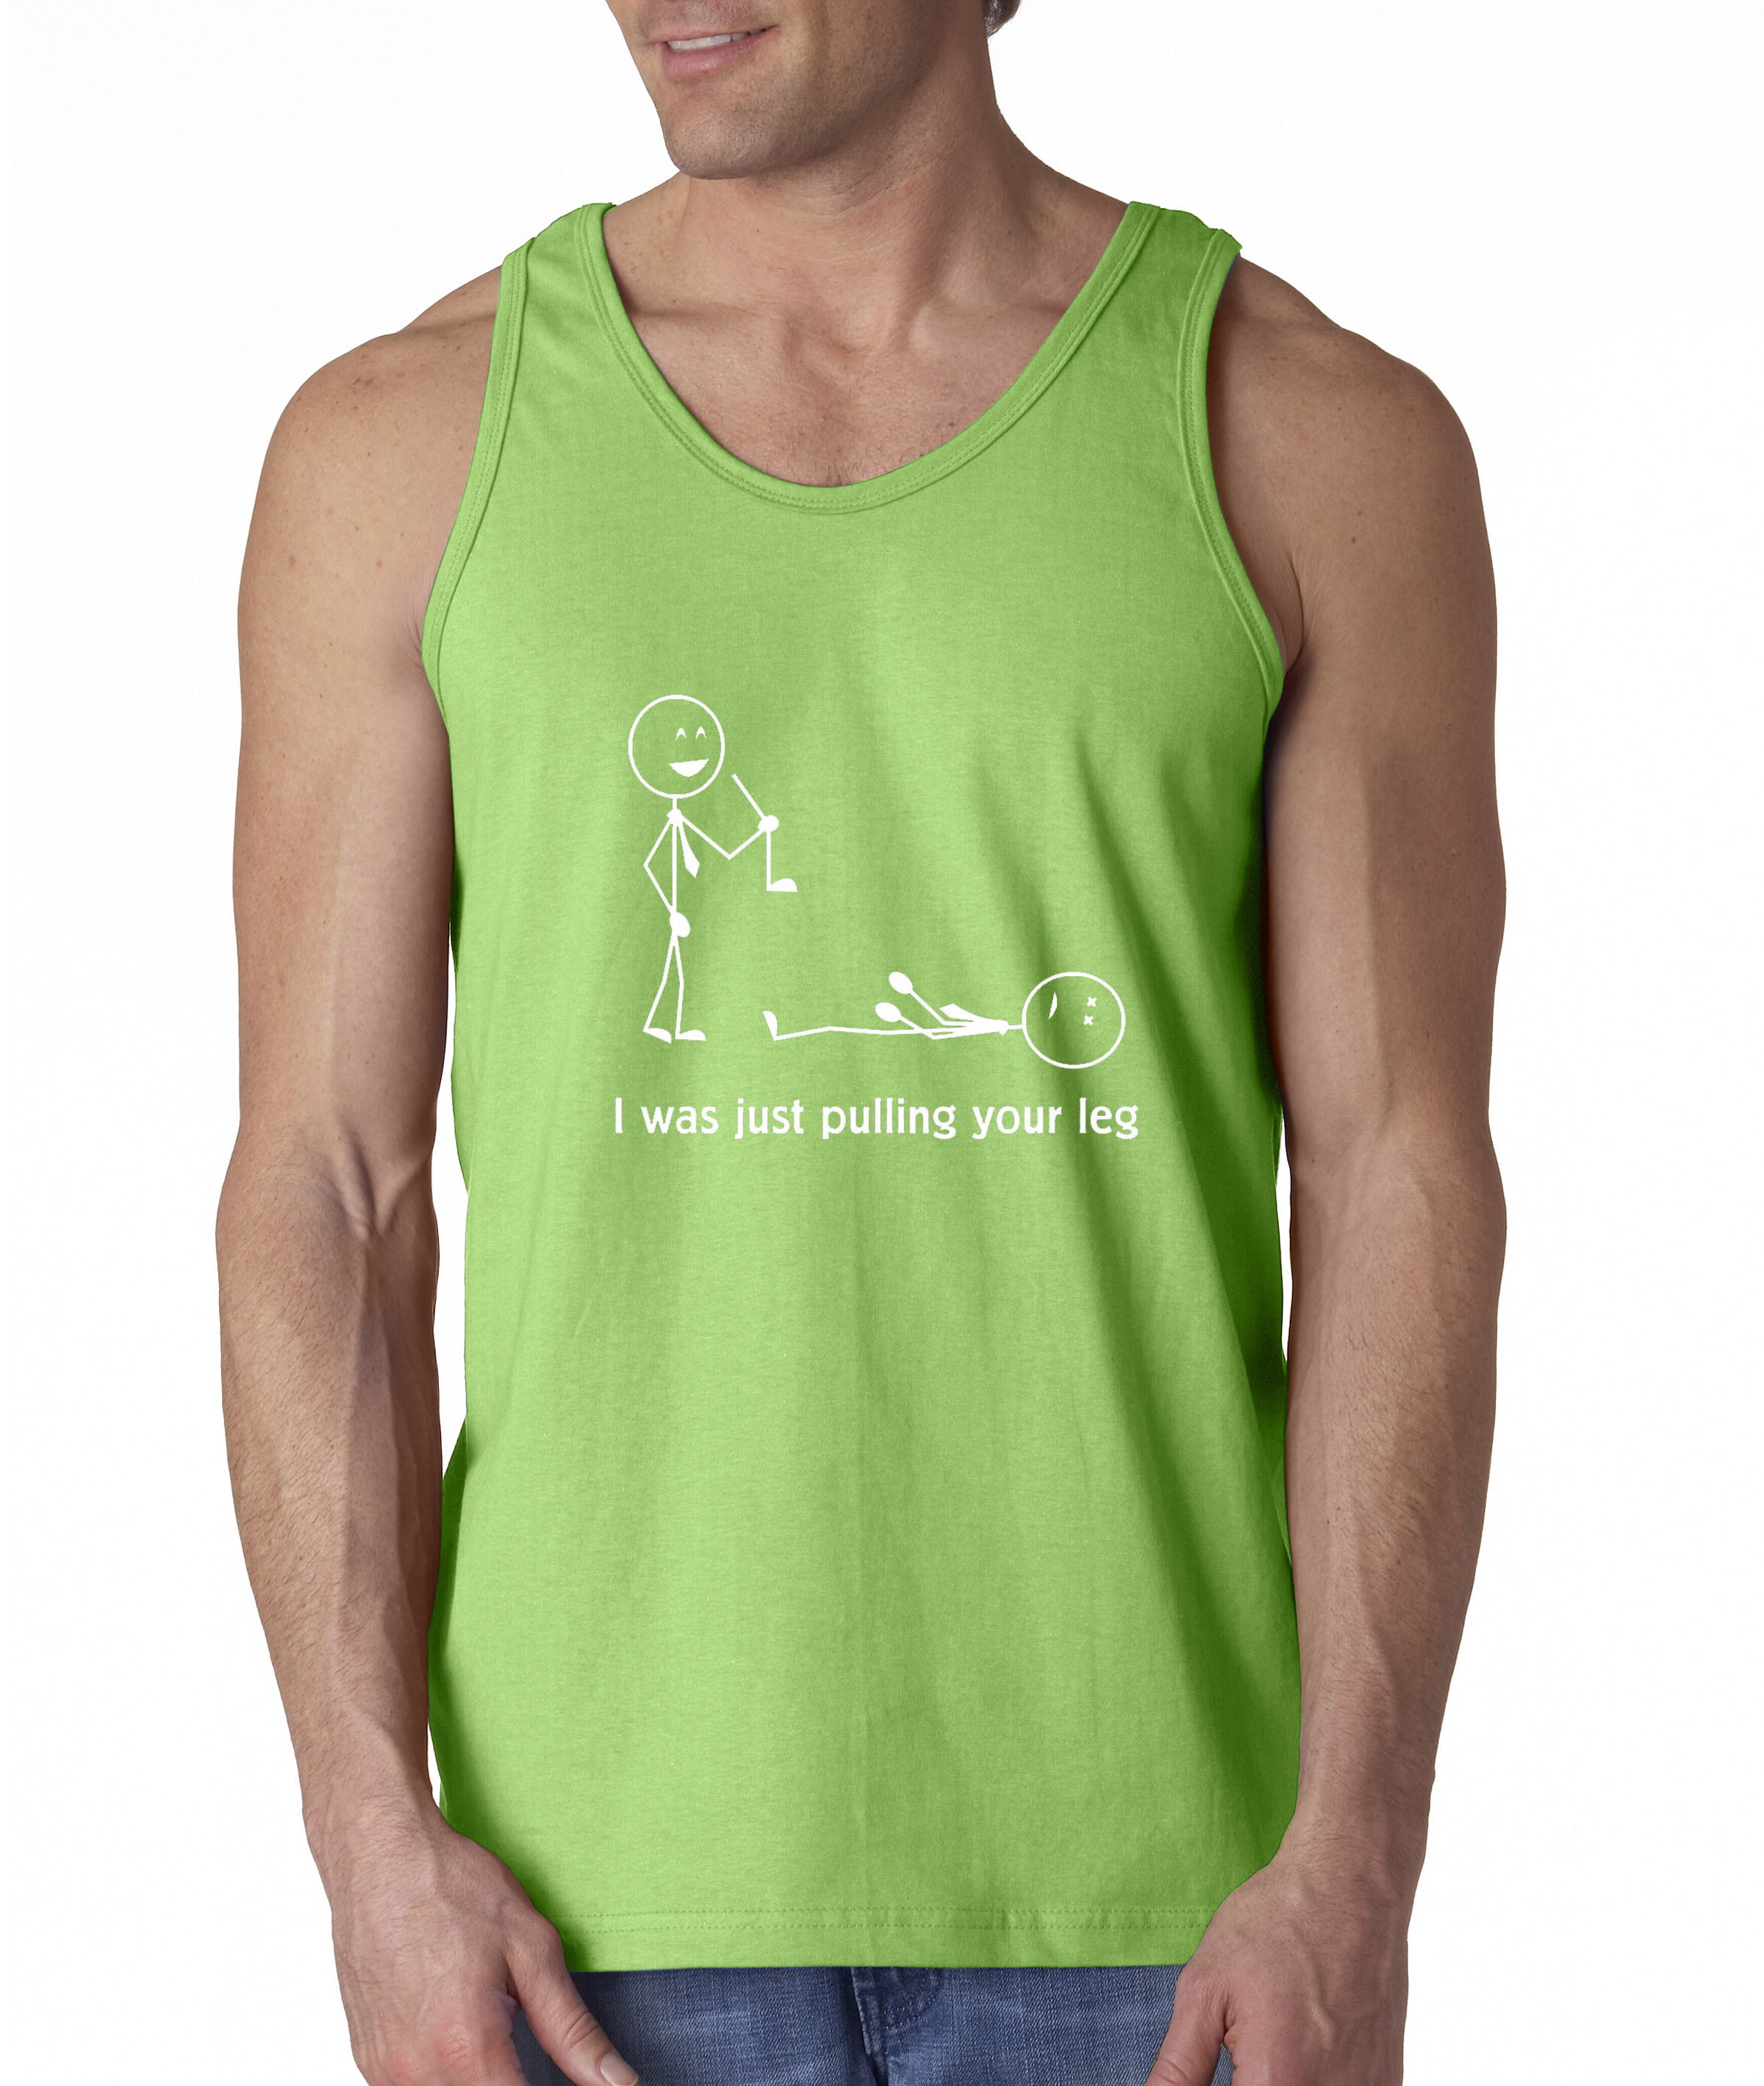 My Legs Unisex Premium Racerback Tank top Mad Over Shirts What are We Doing